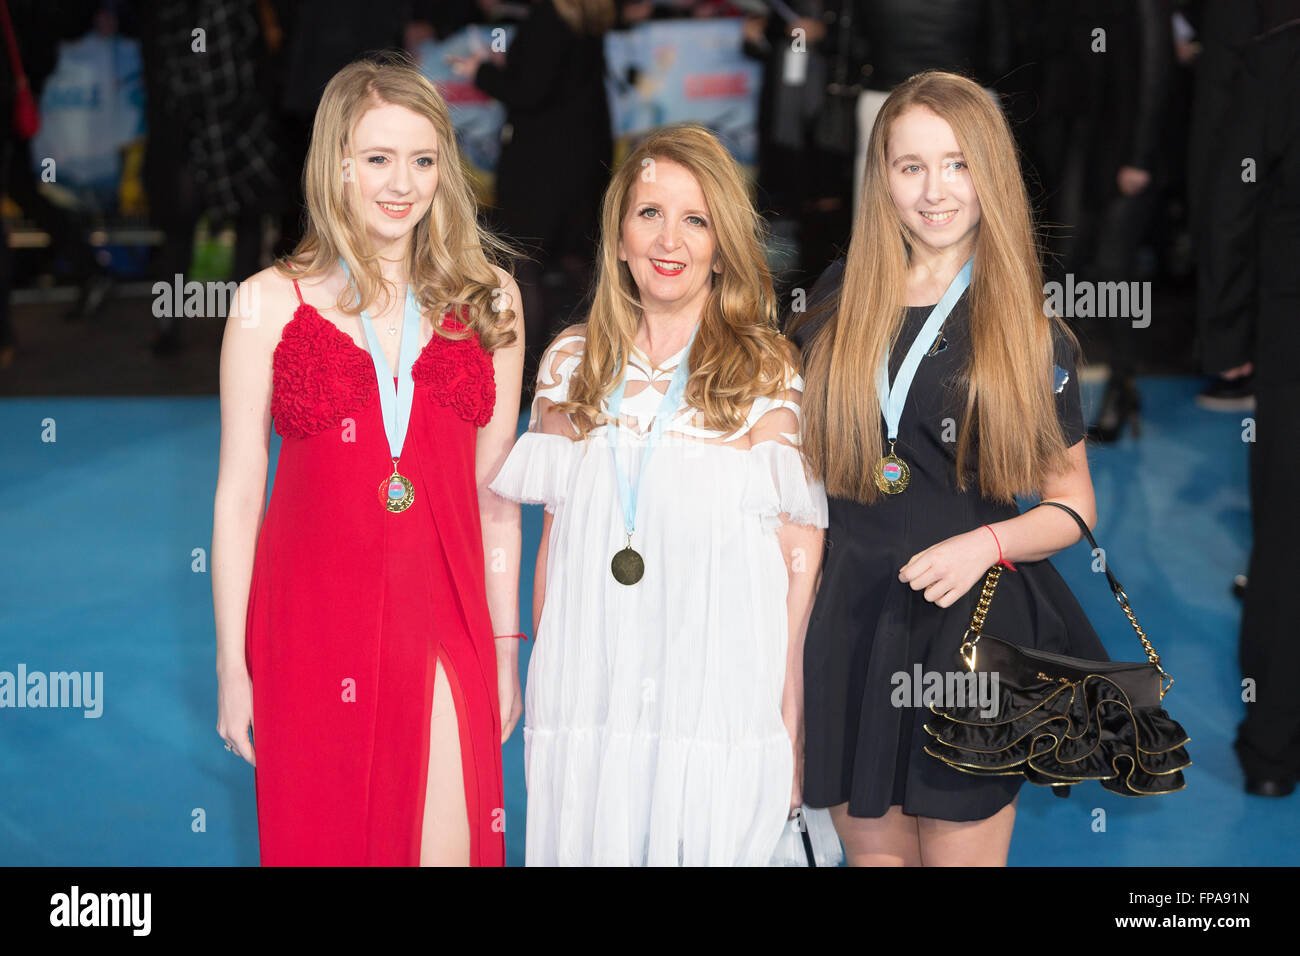 London, UK. 17th March 2016. Gillian McKeith attends 'Eddie The Eagle' film premiere in London. Credit:  London pix/Alamy Live News Stock Photo